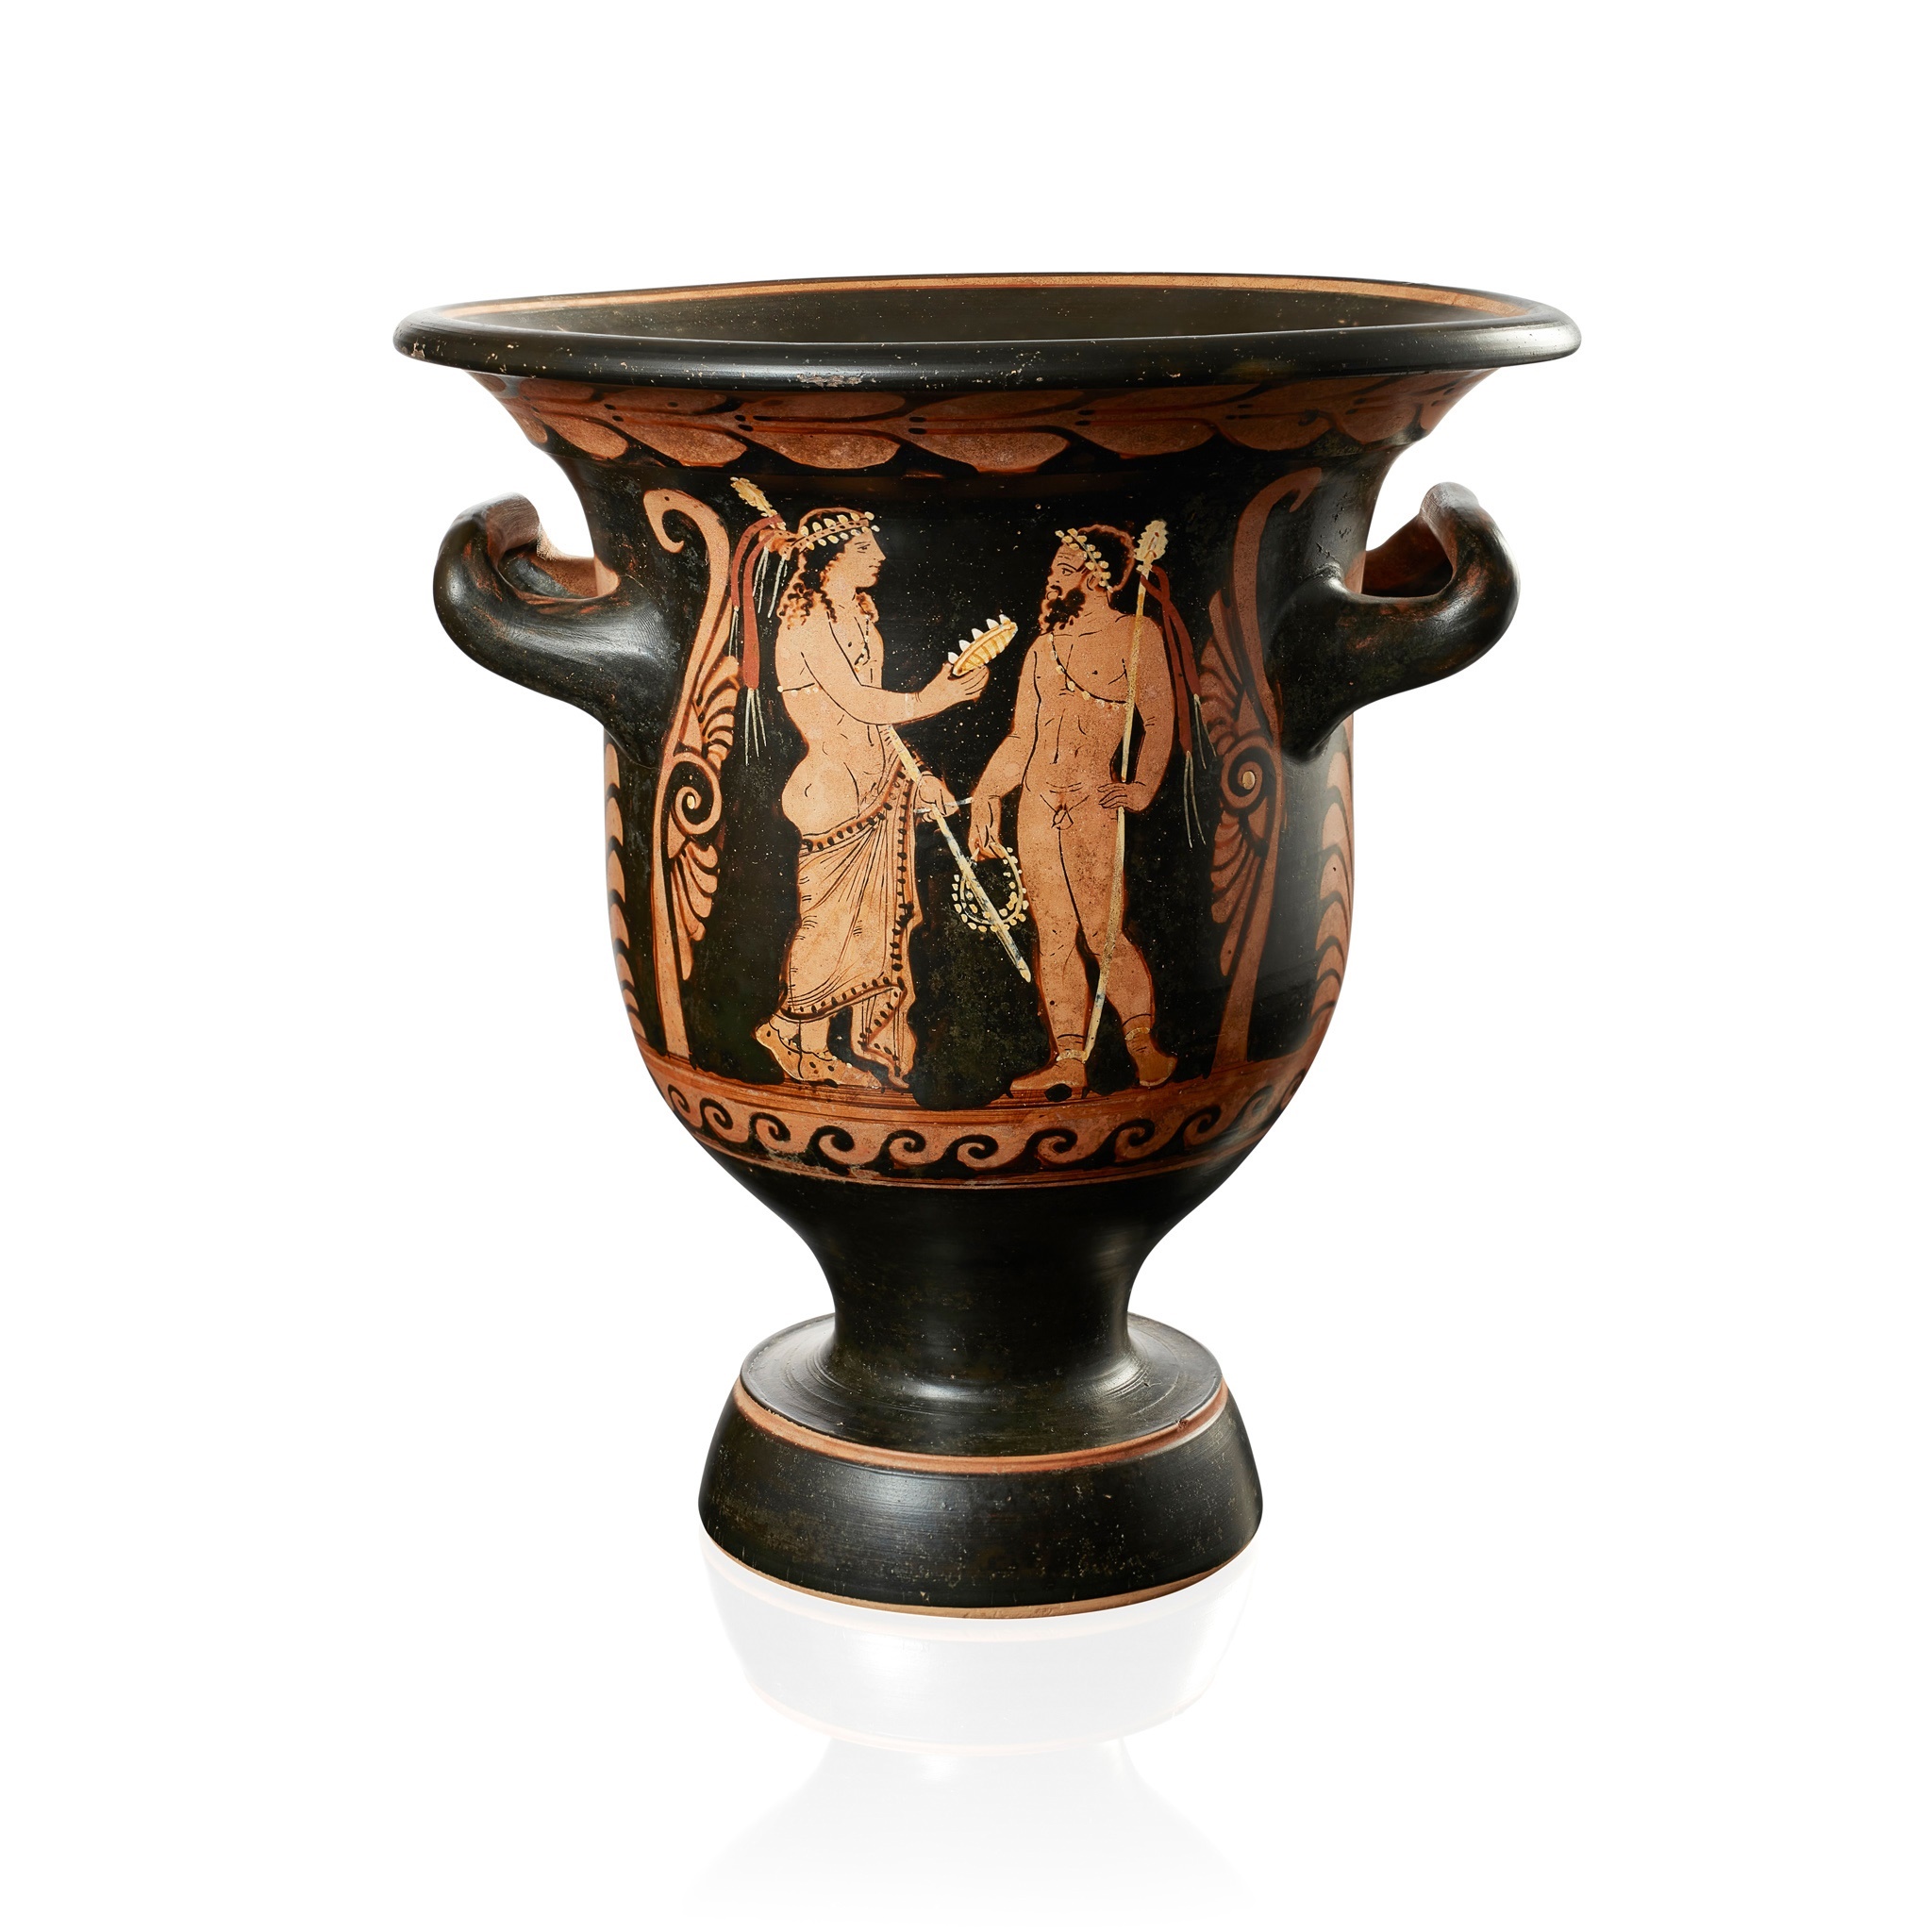 RED FIGURE BELL KRATER ATTRIBUTED TO PYTHON | PAESTUM, C. 340-330 B.C.